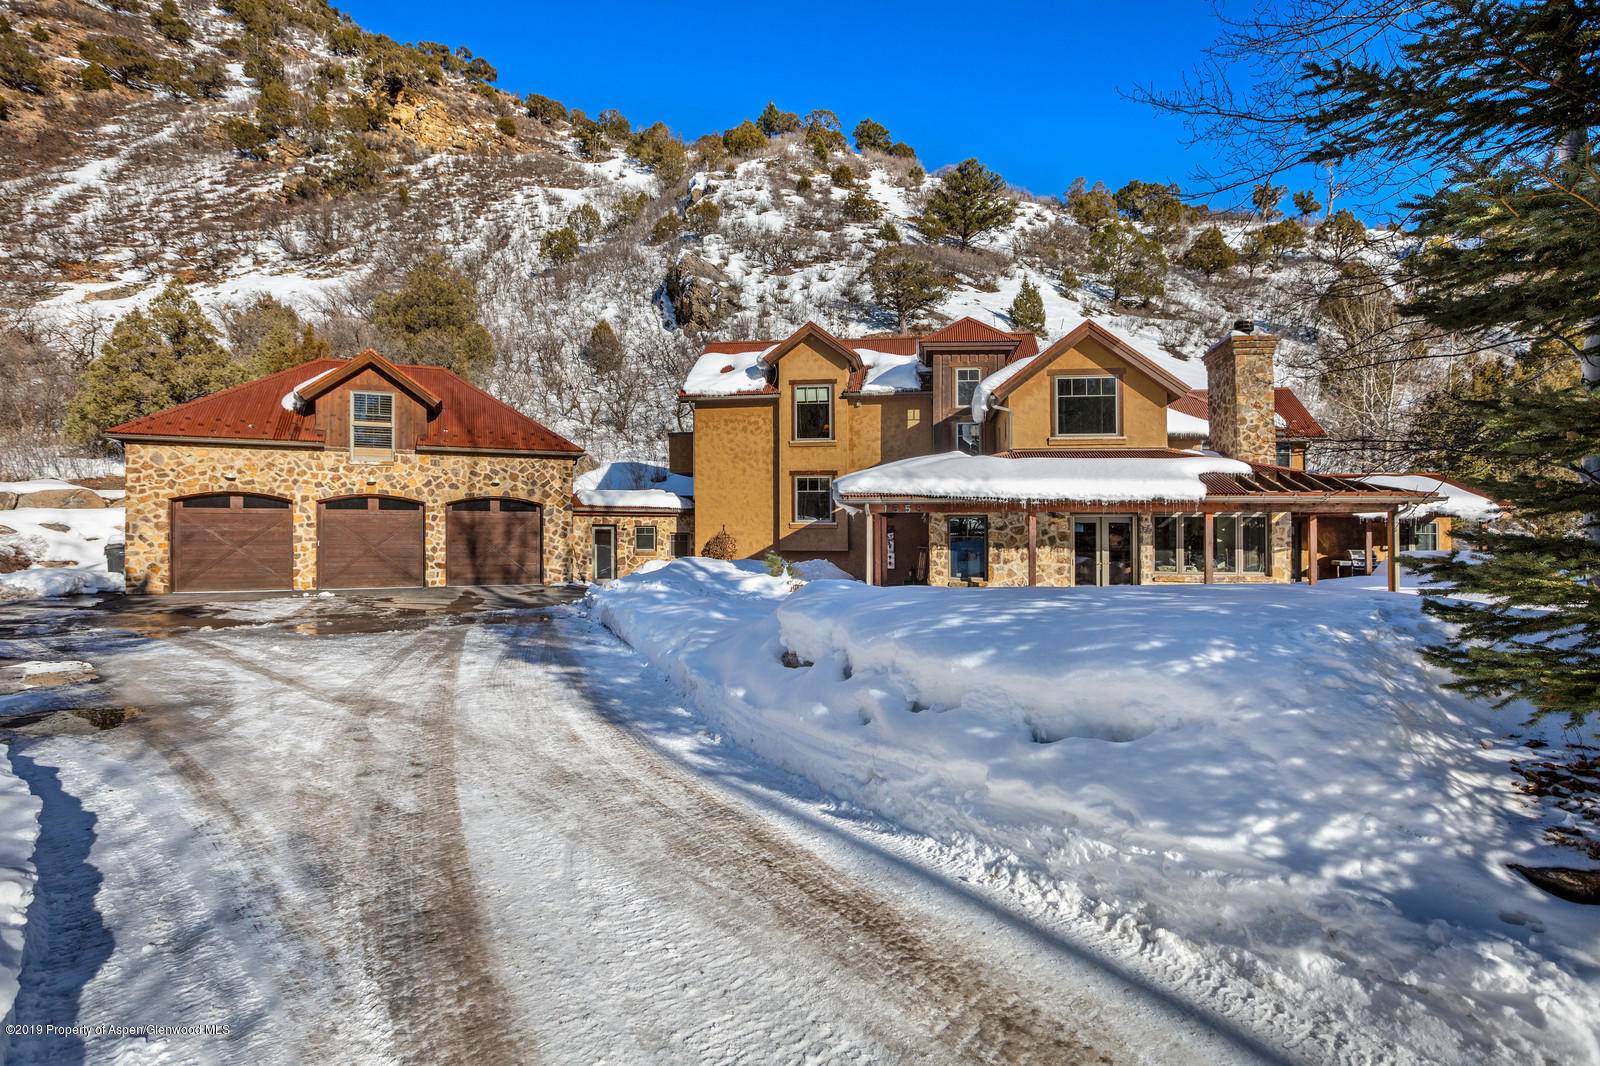 The comfort of the home surrounded by the beauty of Glenwood Canyon, makes it easy to leave your troubles behind.